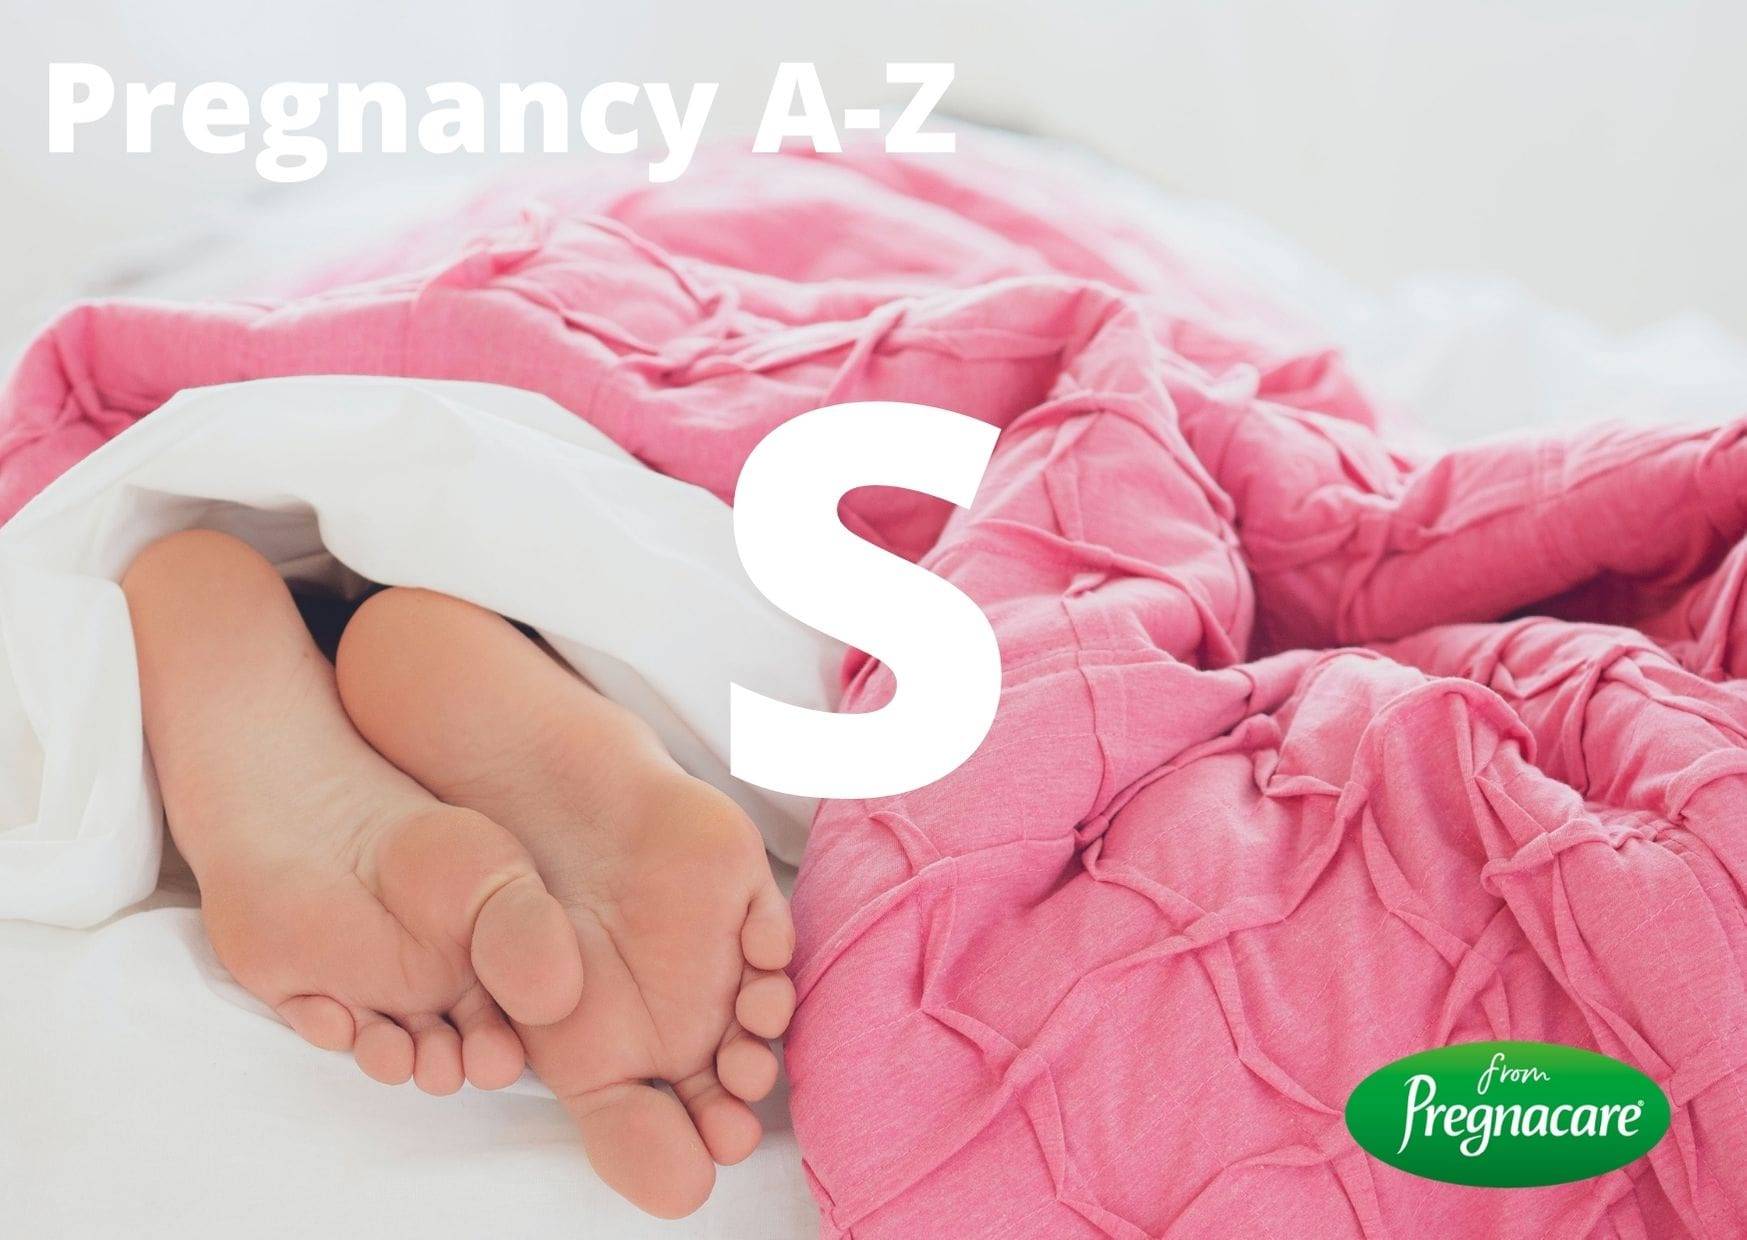 Pregnancy A-Z guide to pregnancy and nutrition - the letter S